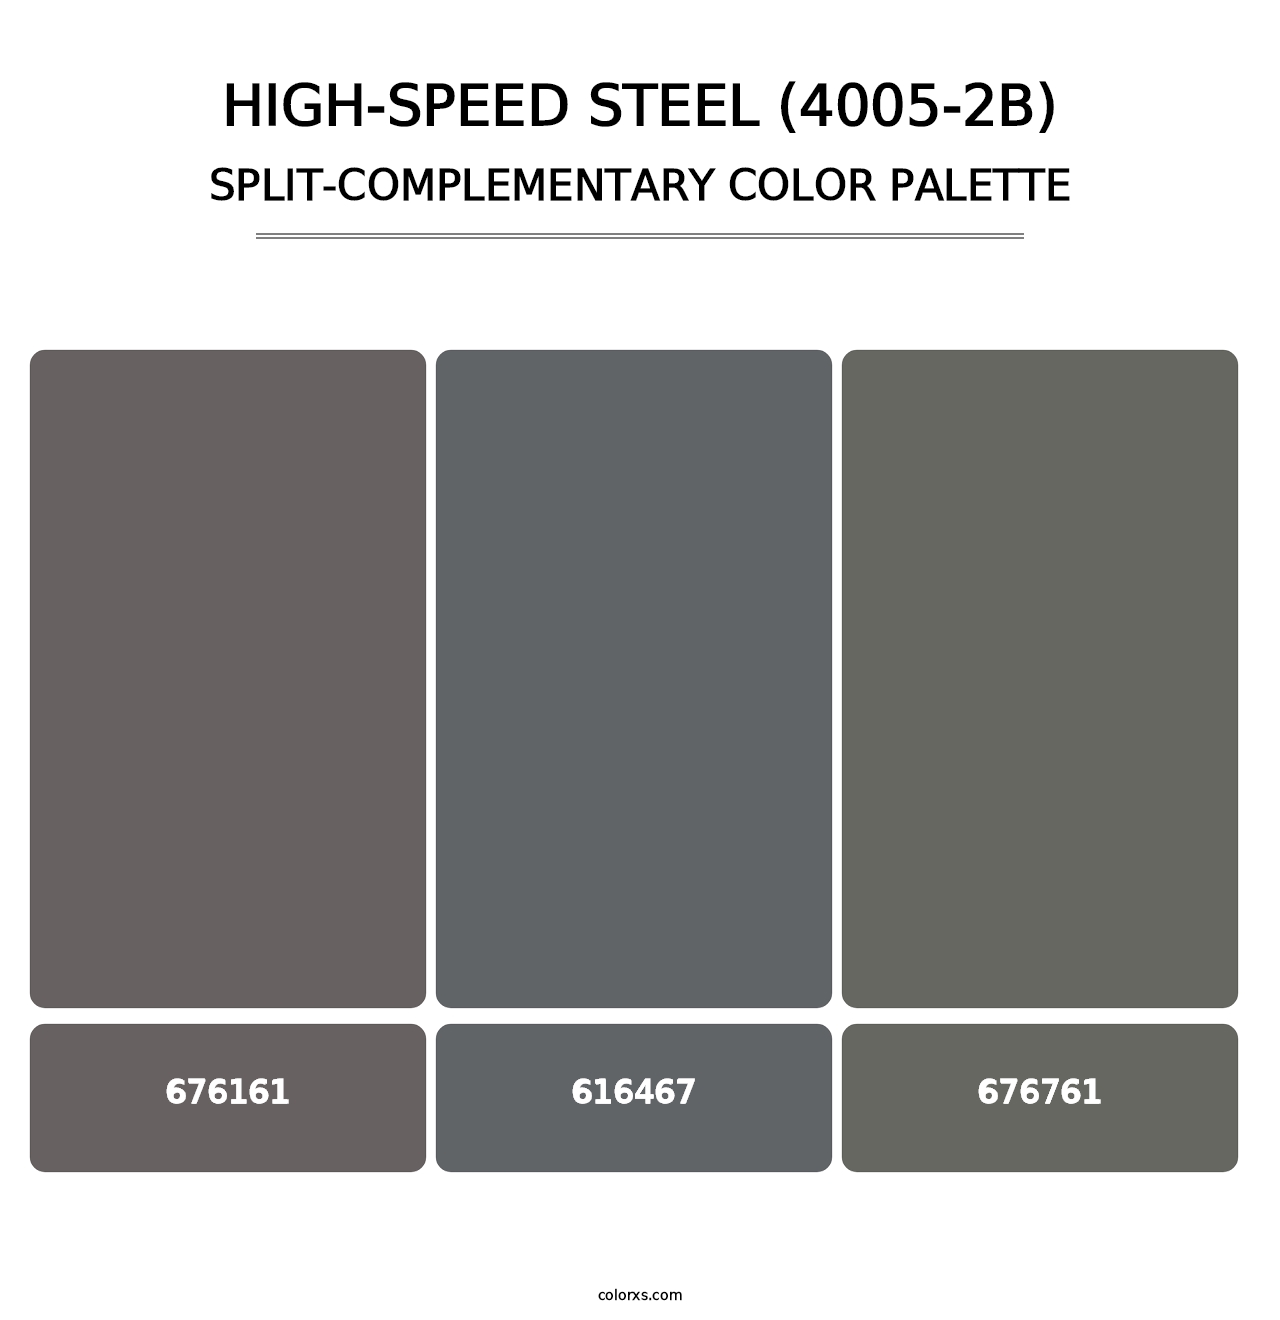 High-Speed Steel (4005-2B) - Split-Complementary Color Palette